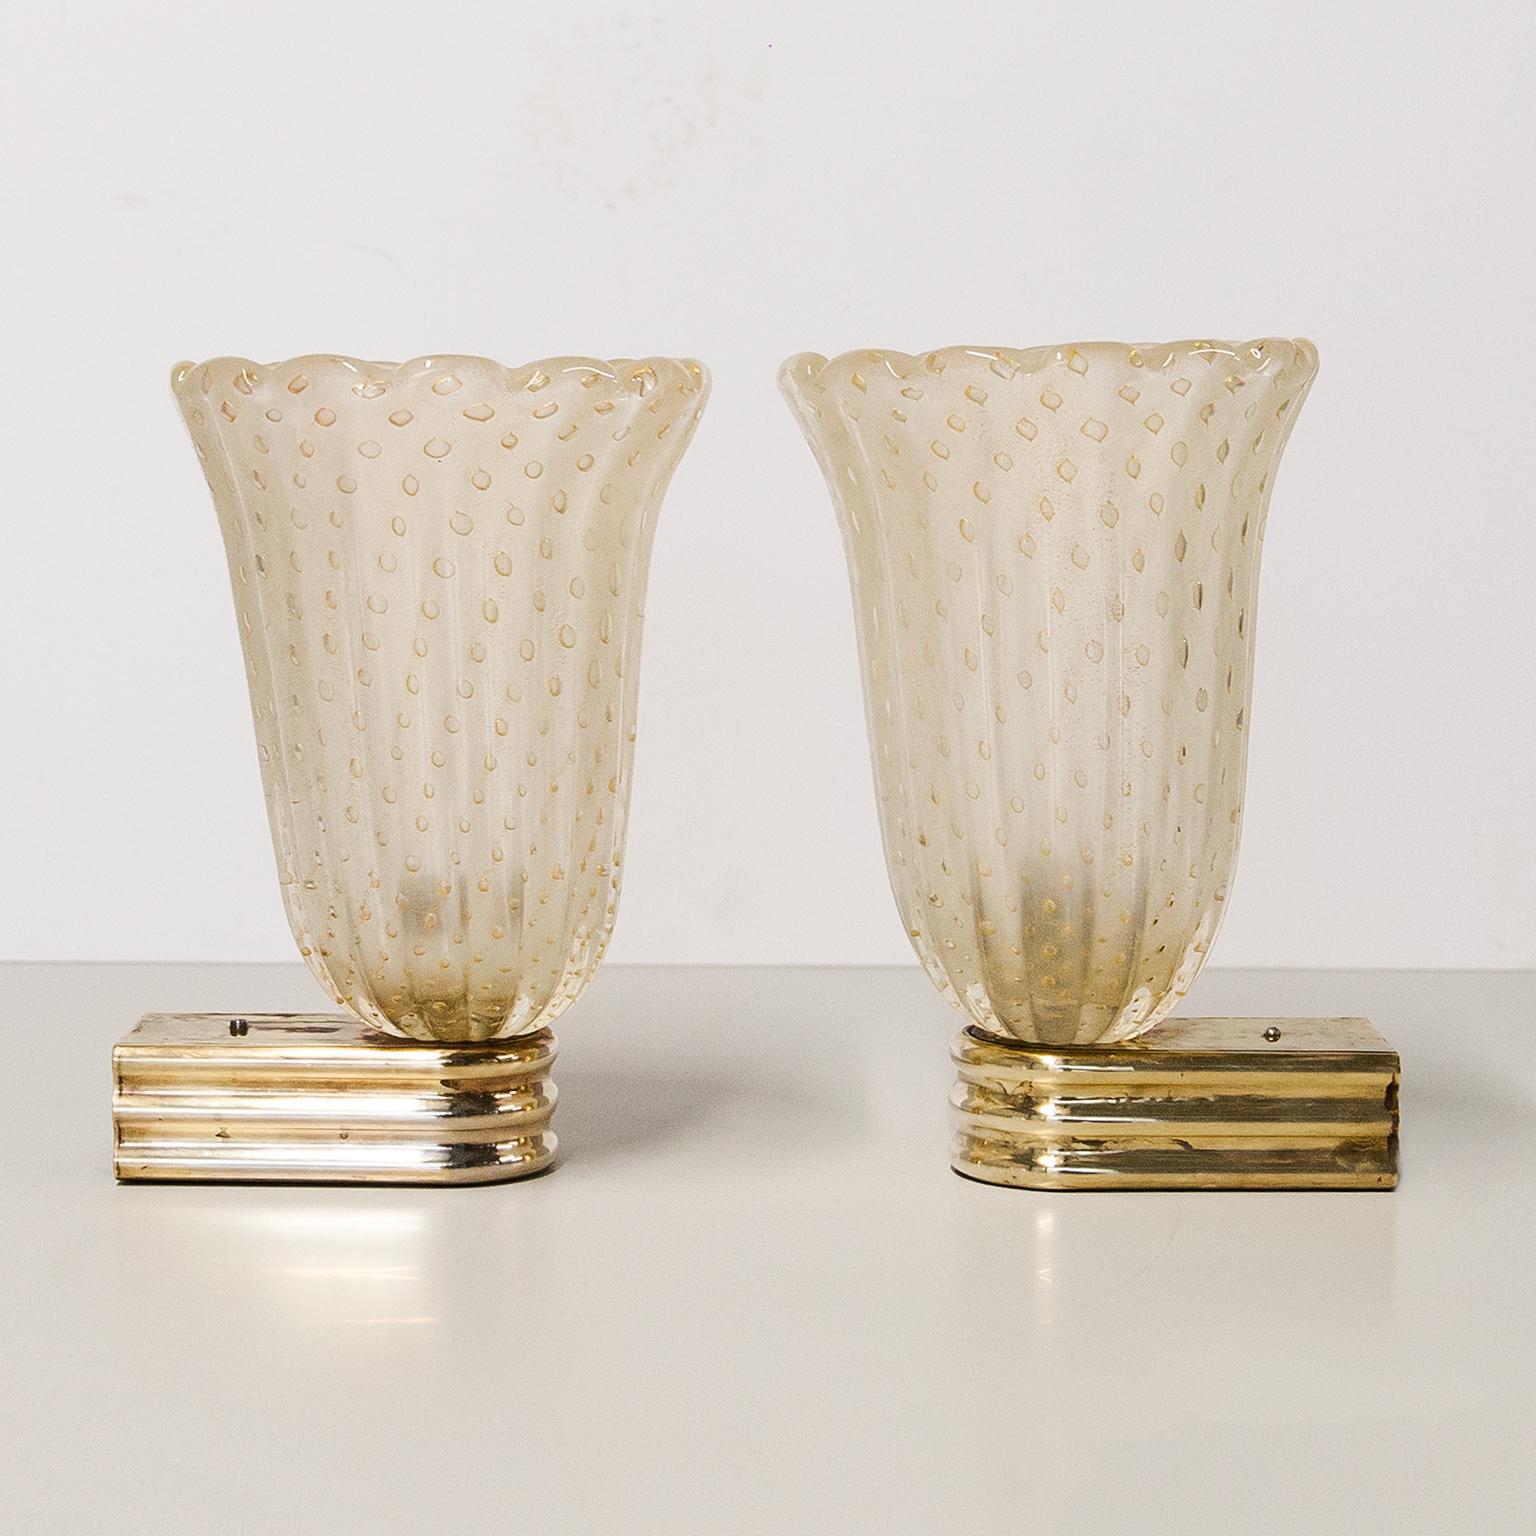 Rare and authentic large pair of Italian Art Deco wall lights (1930-1940) deigned by Ercole Barovier for the House of BAROVIER in Venice (Murano). These sconces are designed in the pulegoso technique, with real gold flitters in the Murano glass und